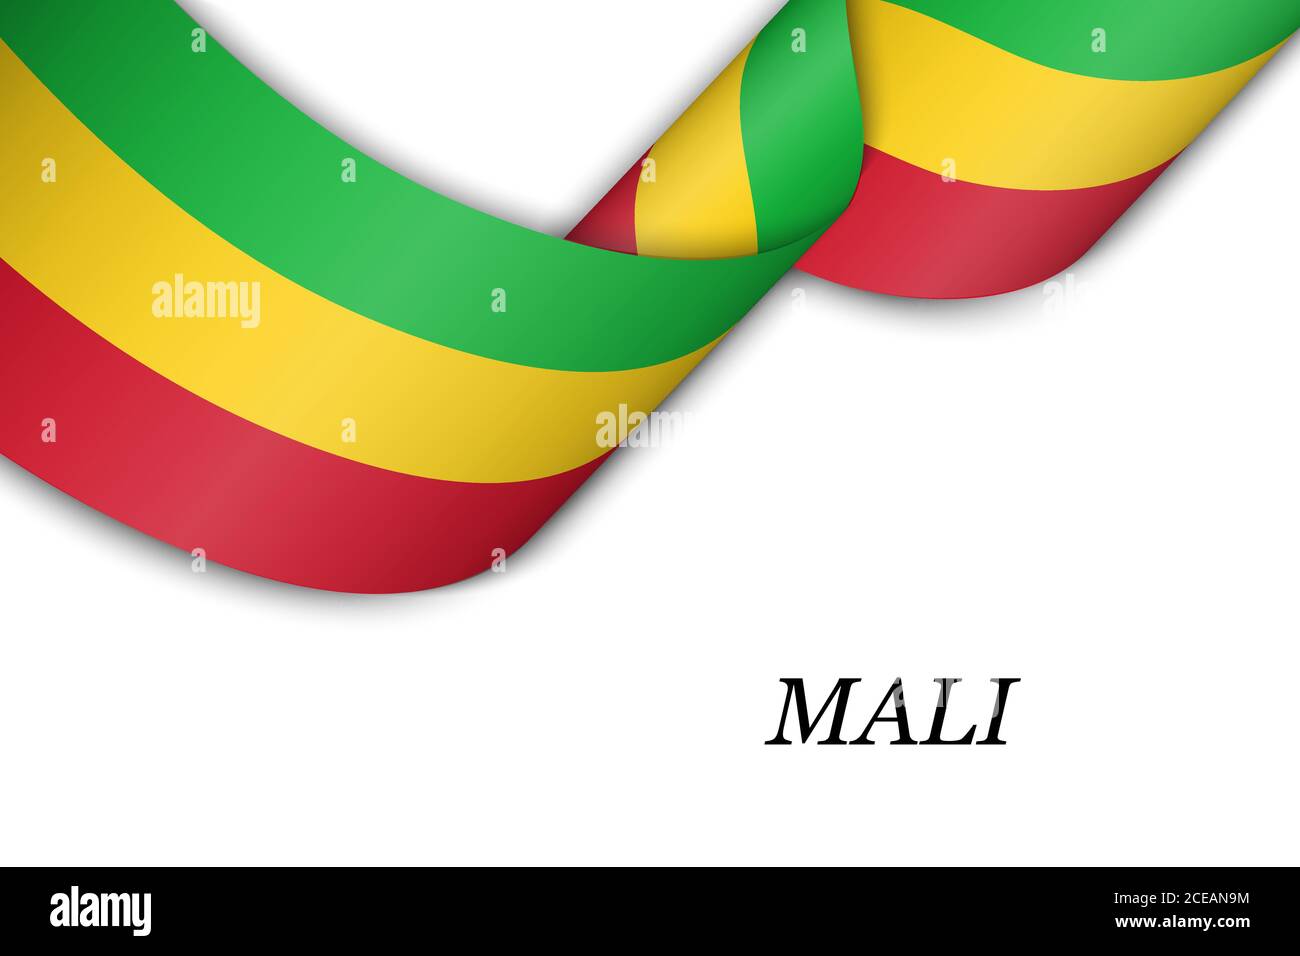 Mali Stock Vector Images - Alamy